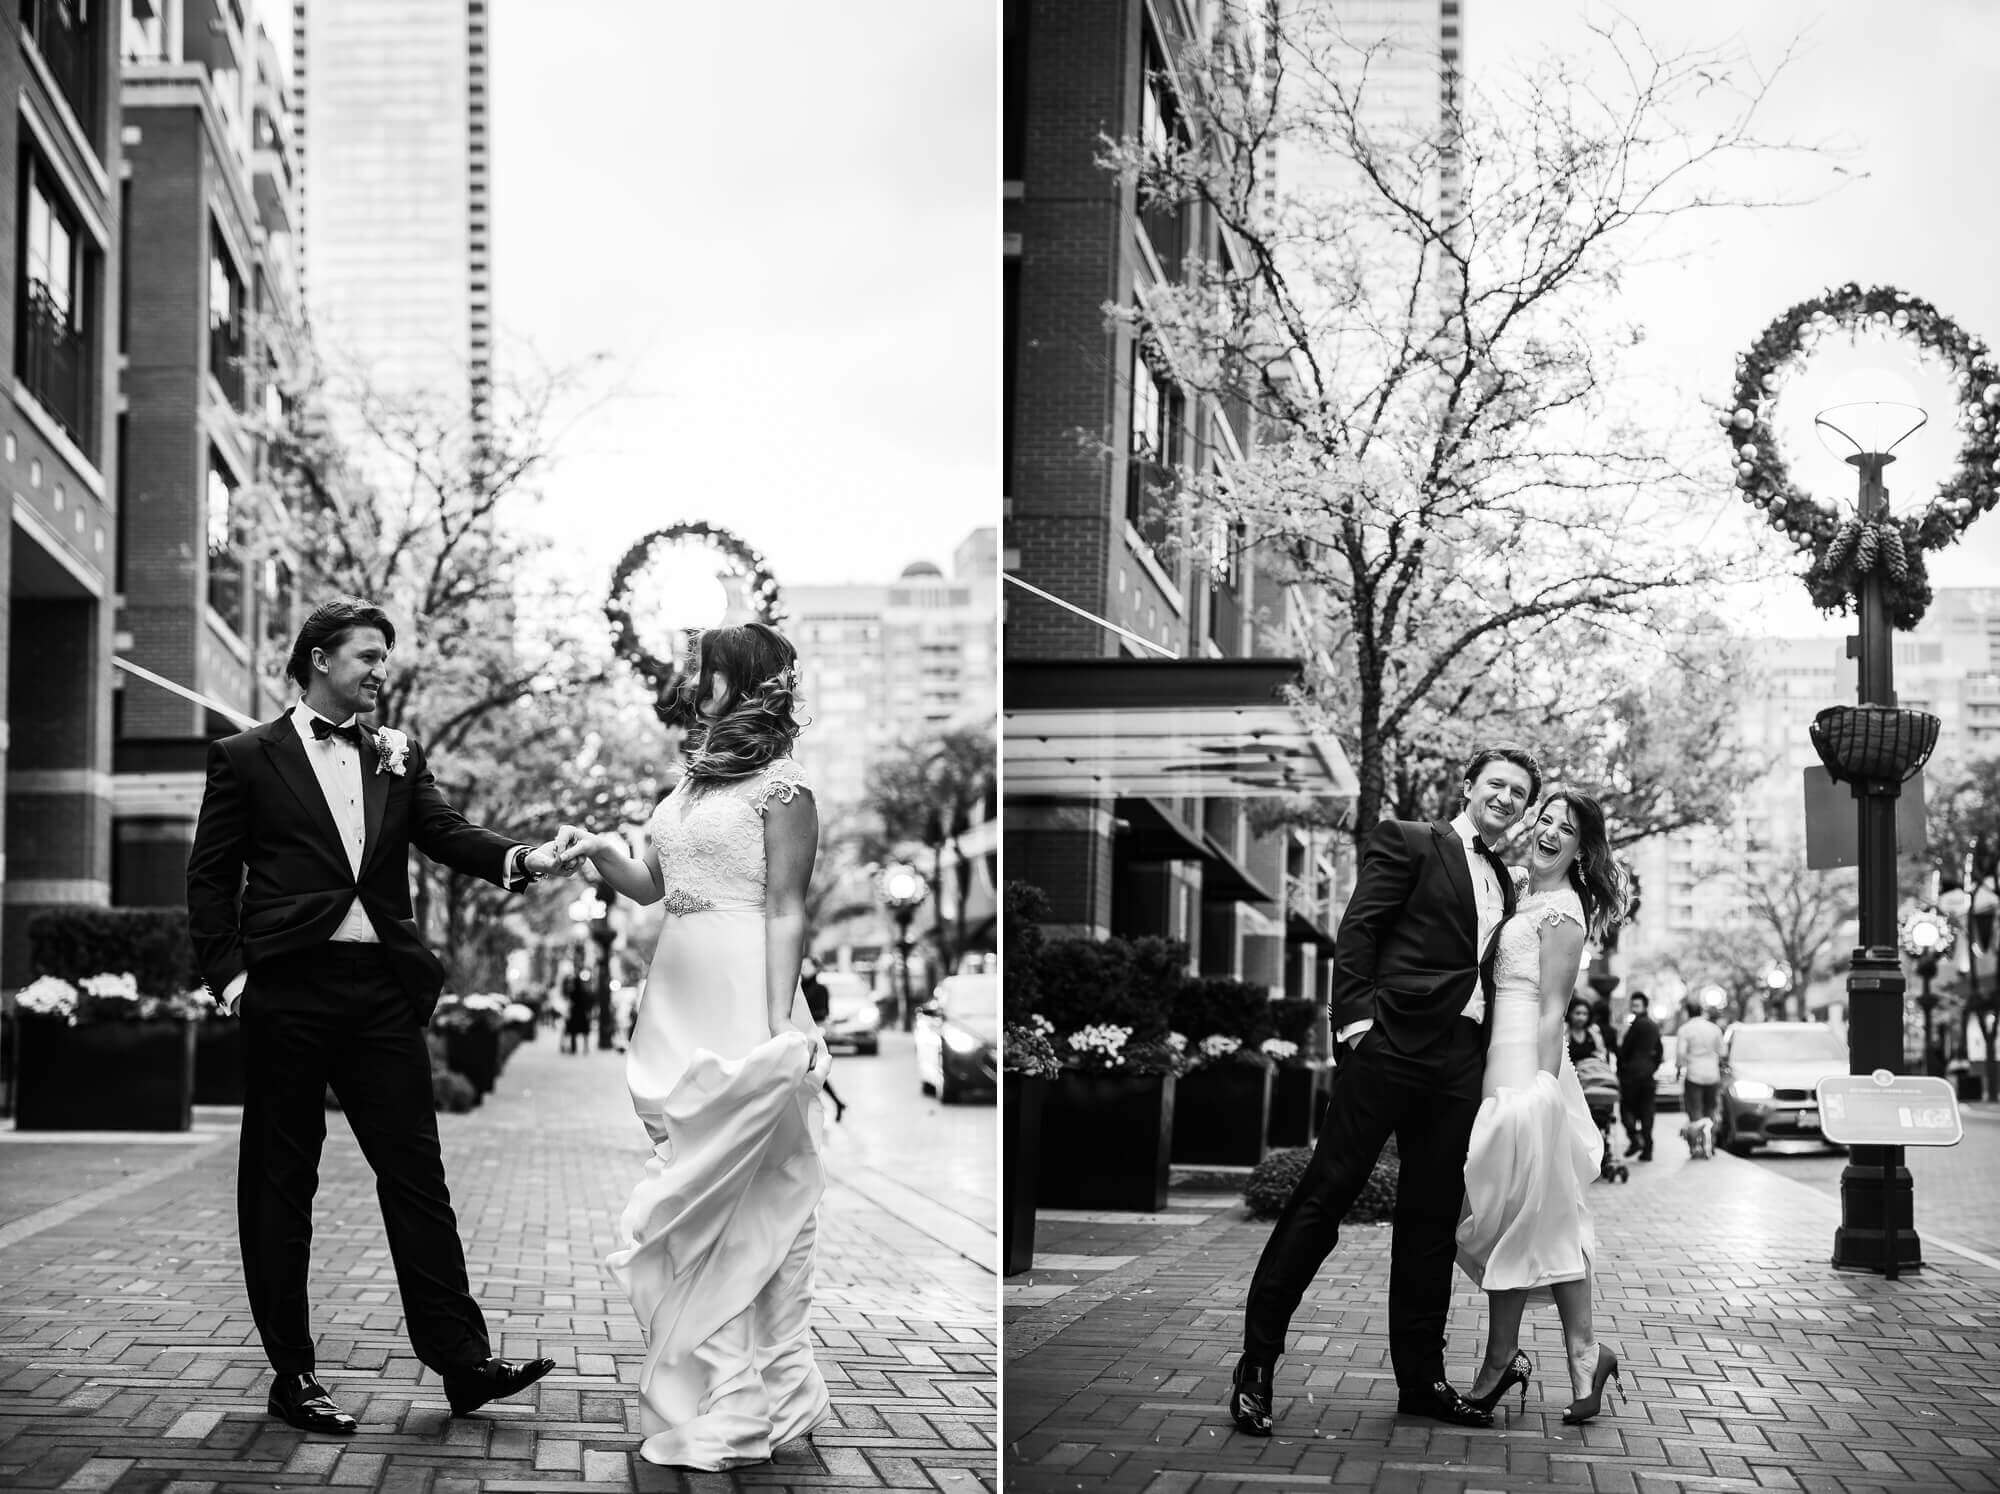 Beautiful black and white city portraits of the bride and groom in the streets of Yorkville, Toronto